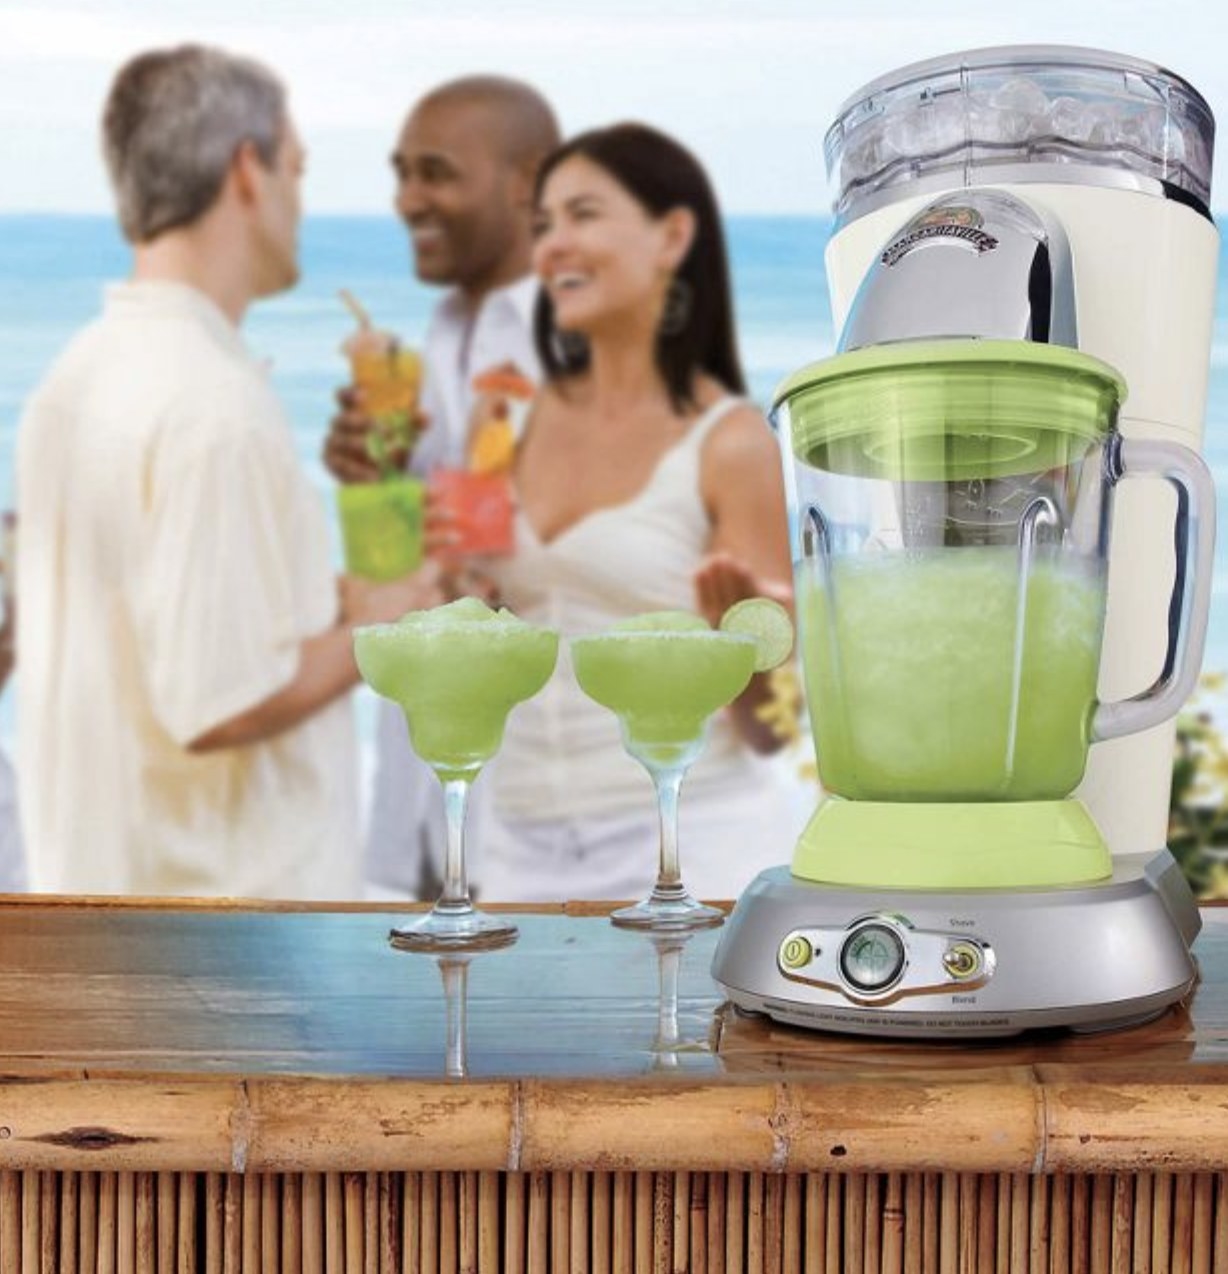 margarita machine next to two glasses with models enjoying in the background